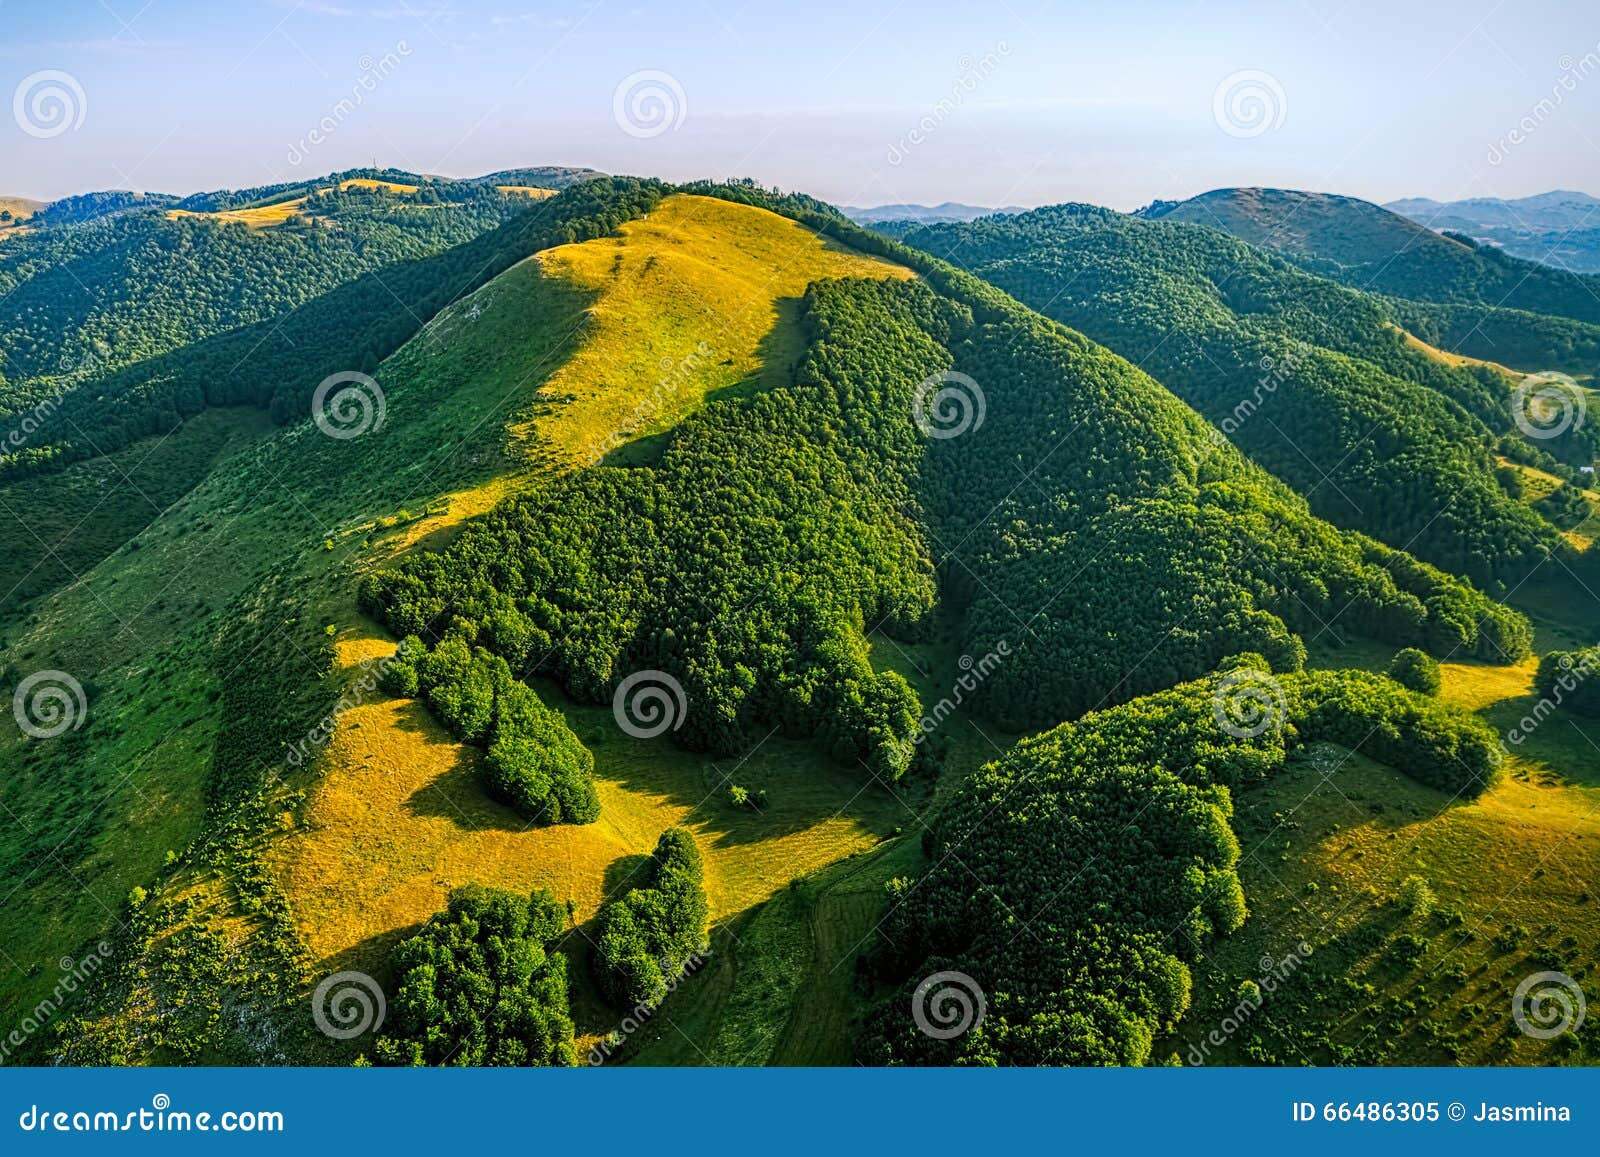 montenegro-forest-aerial-helicopter-photo-plateau-mountain-66486305.jpg